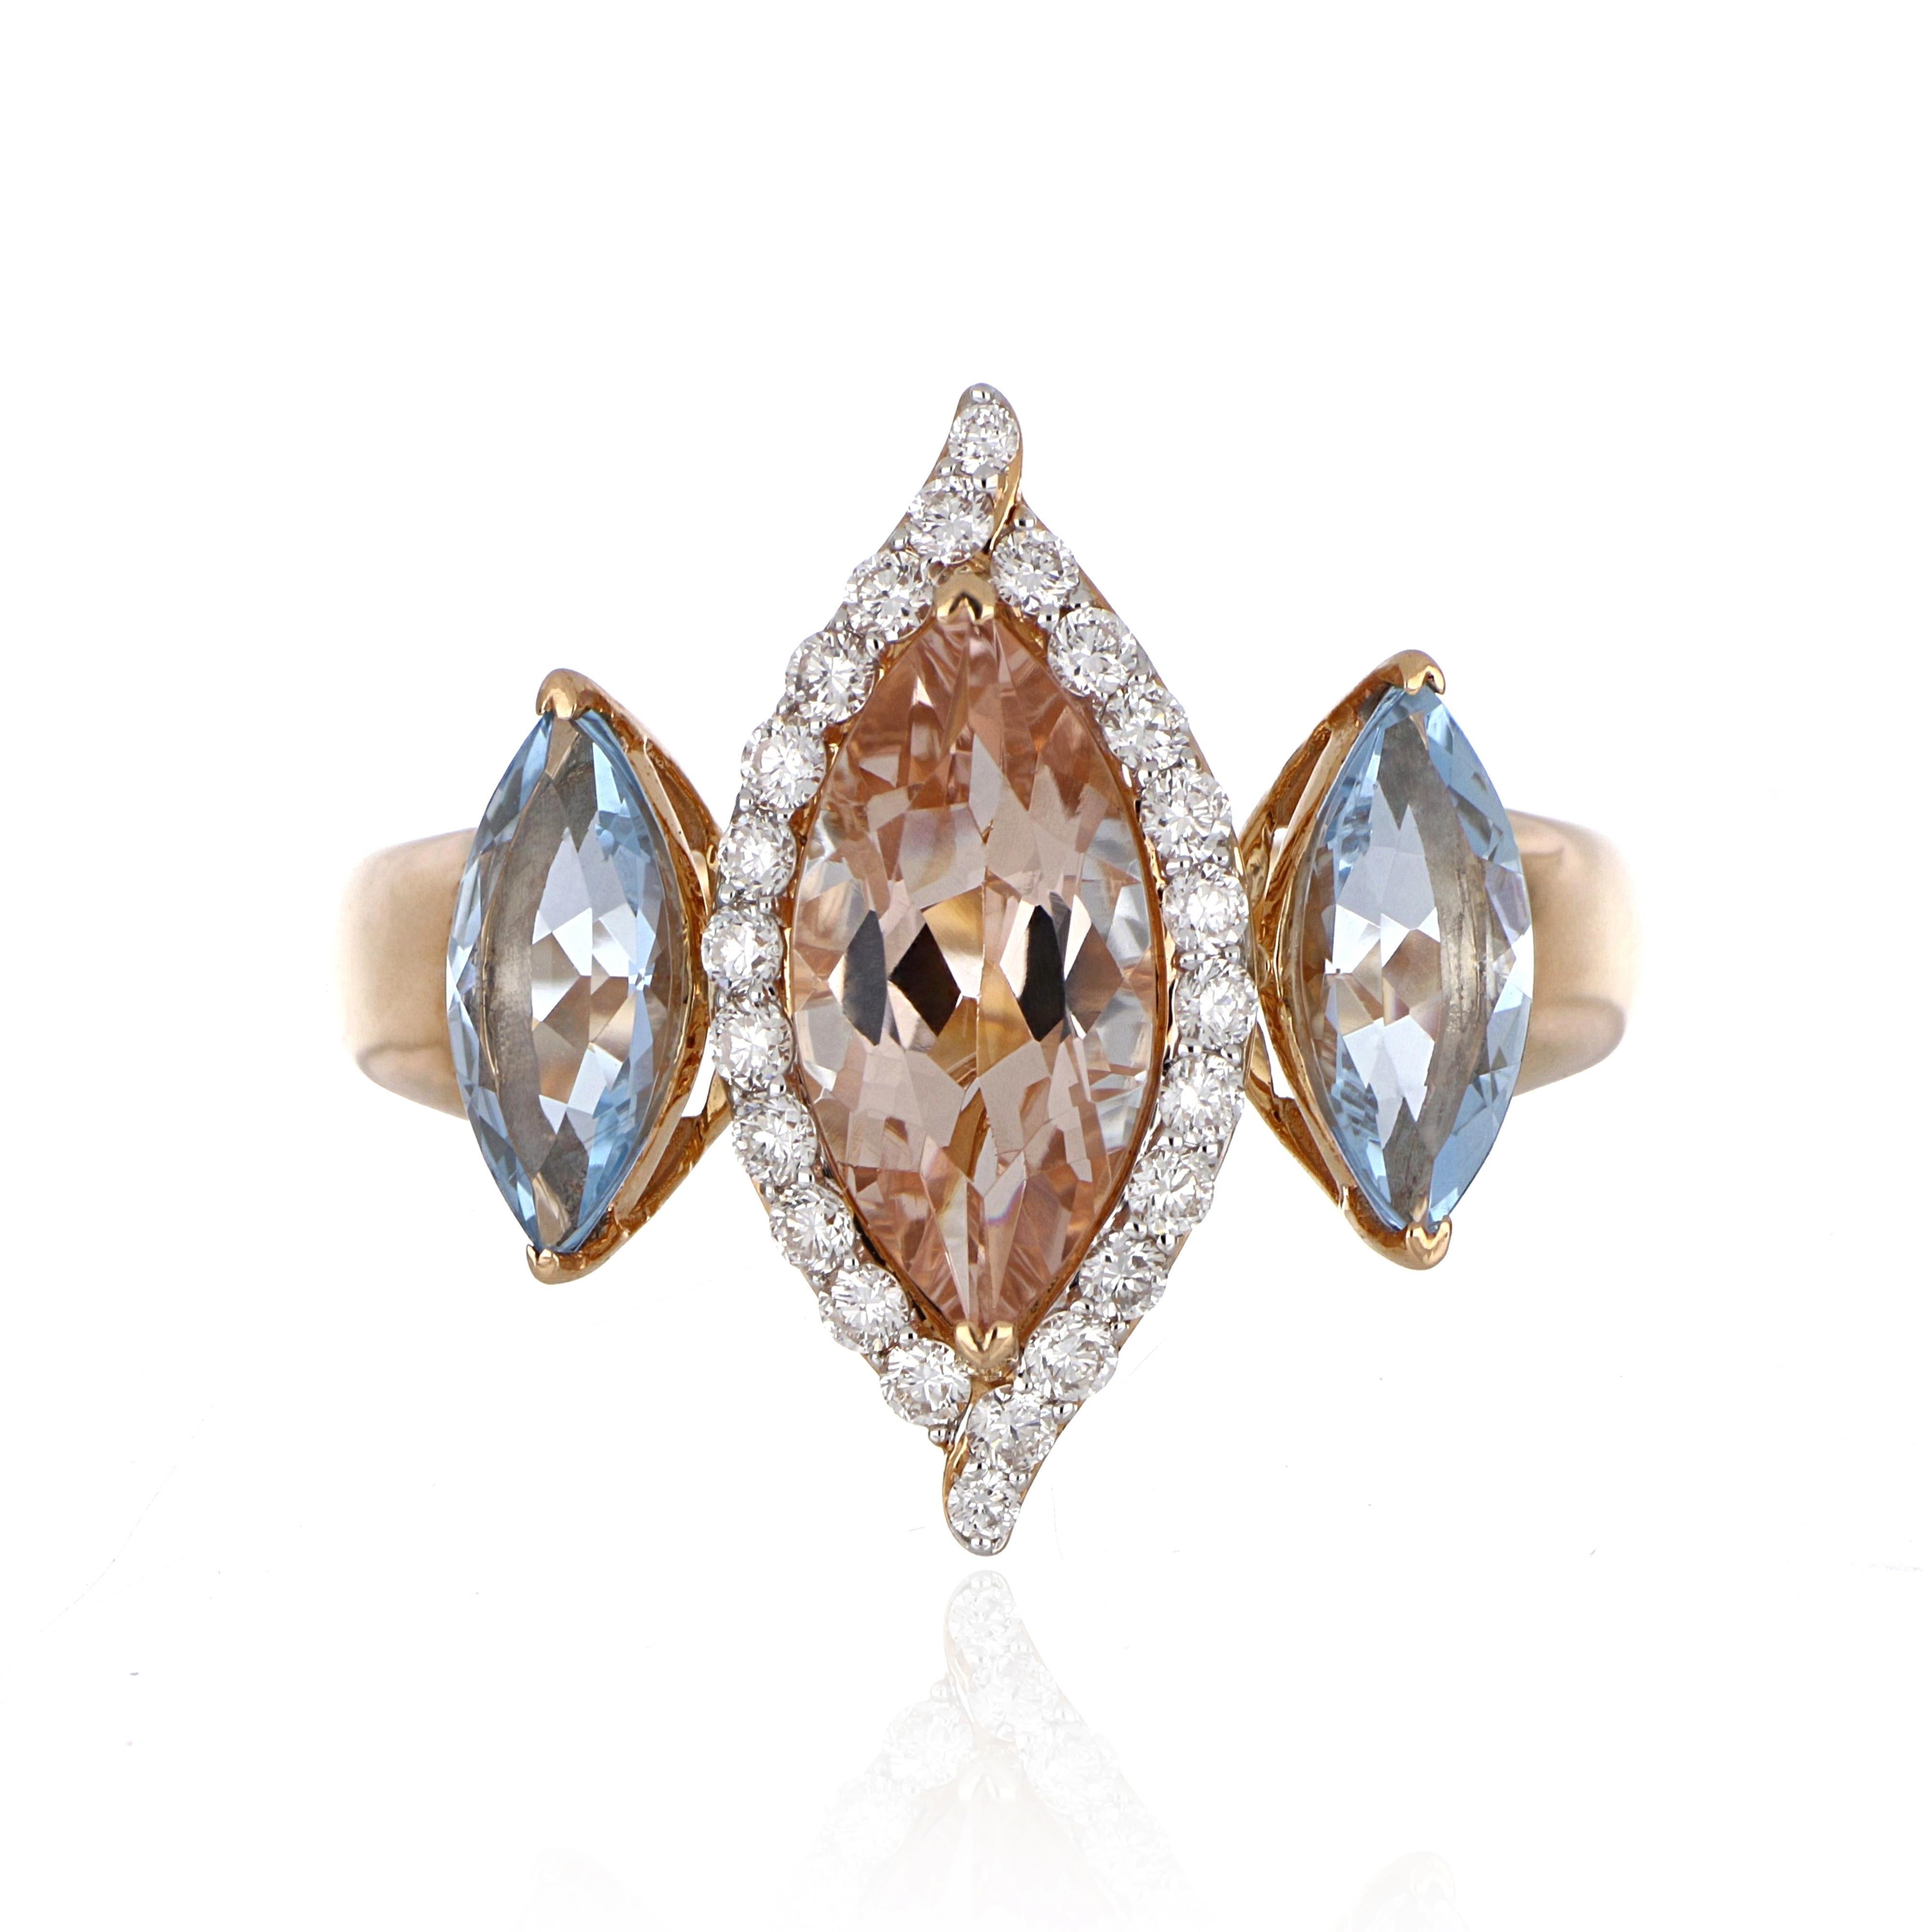 Elegant and exquisitely detailed three Stone Cocktail 18K Ring, centre set with 1.57 Ct Marquise Morganite and 1.24 Ct Marquise Aquamarine, surrounded by and enhanced on shank with micro pave Diamonds, weighing approx. 0.32 total carat weight.